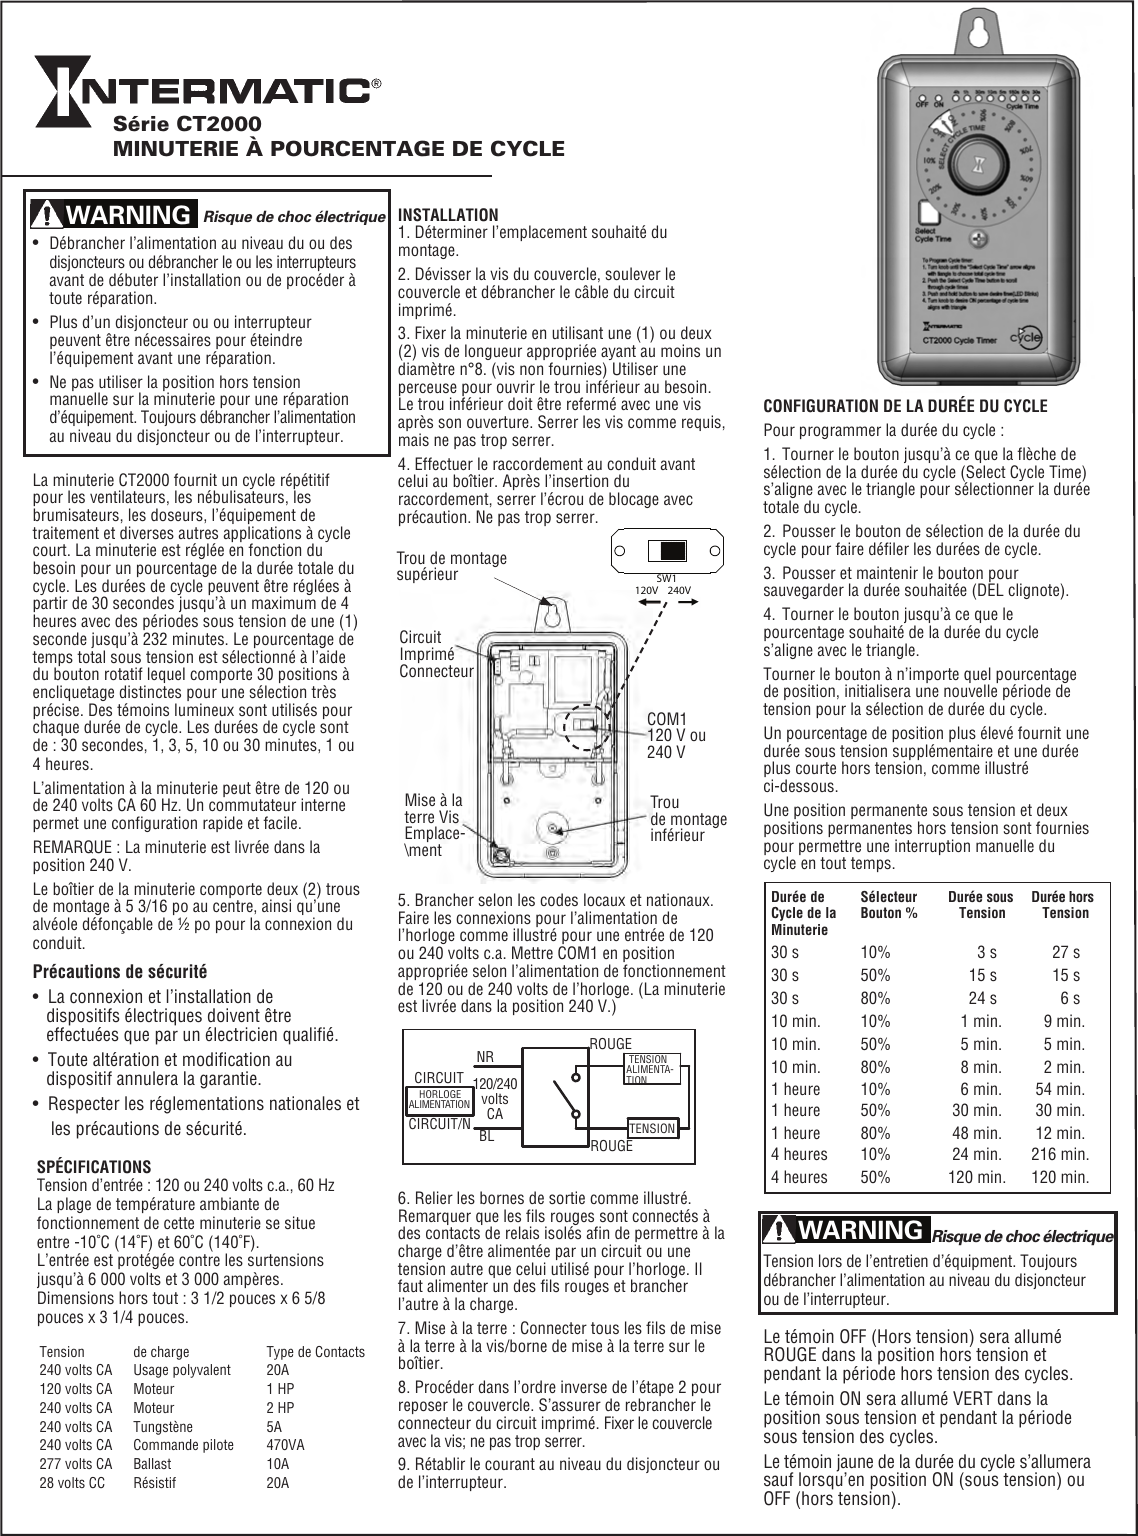 Page 3 of 4 - Intermatic Intermatic-Ct2000-Instructions-Owner-S-Manual